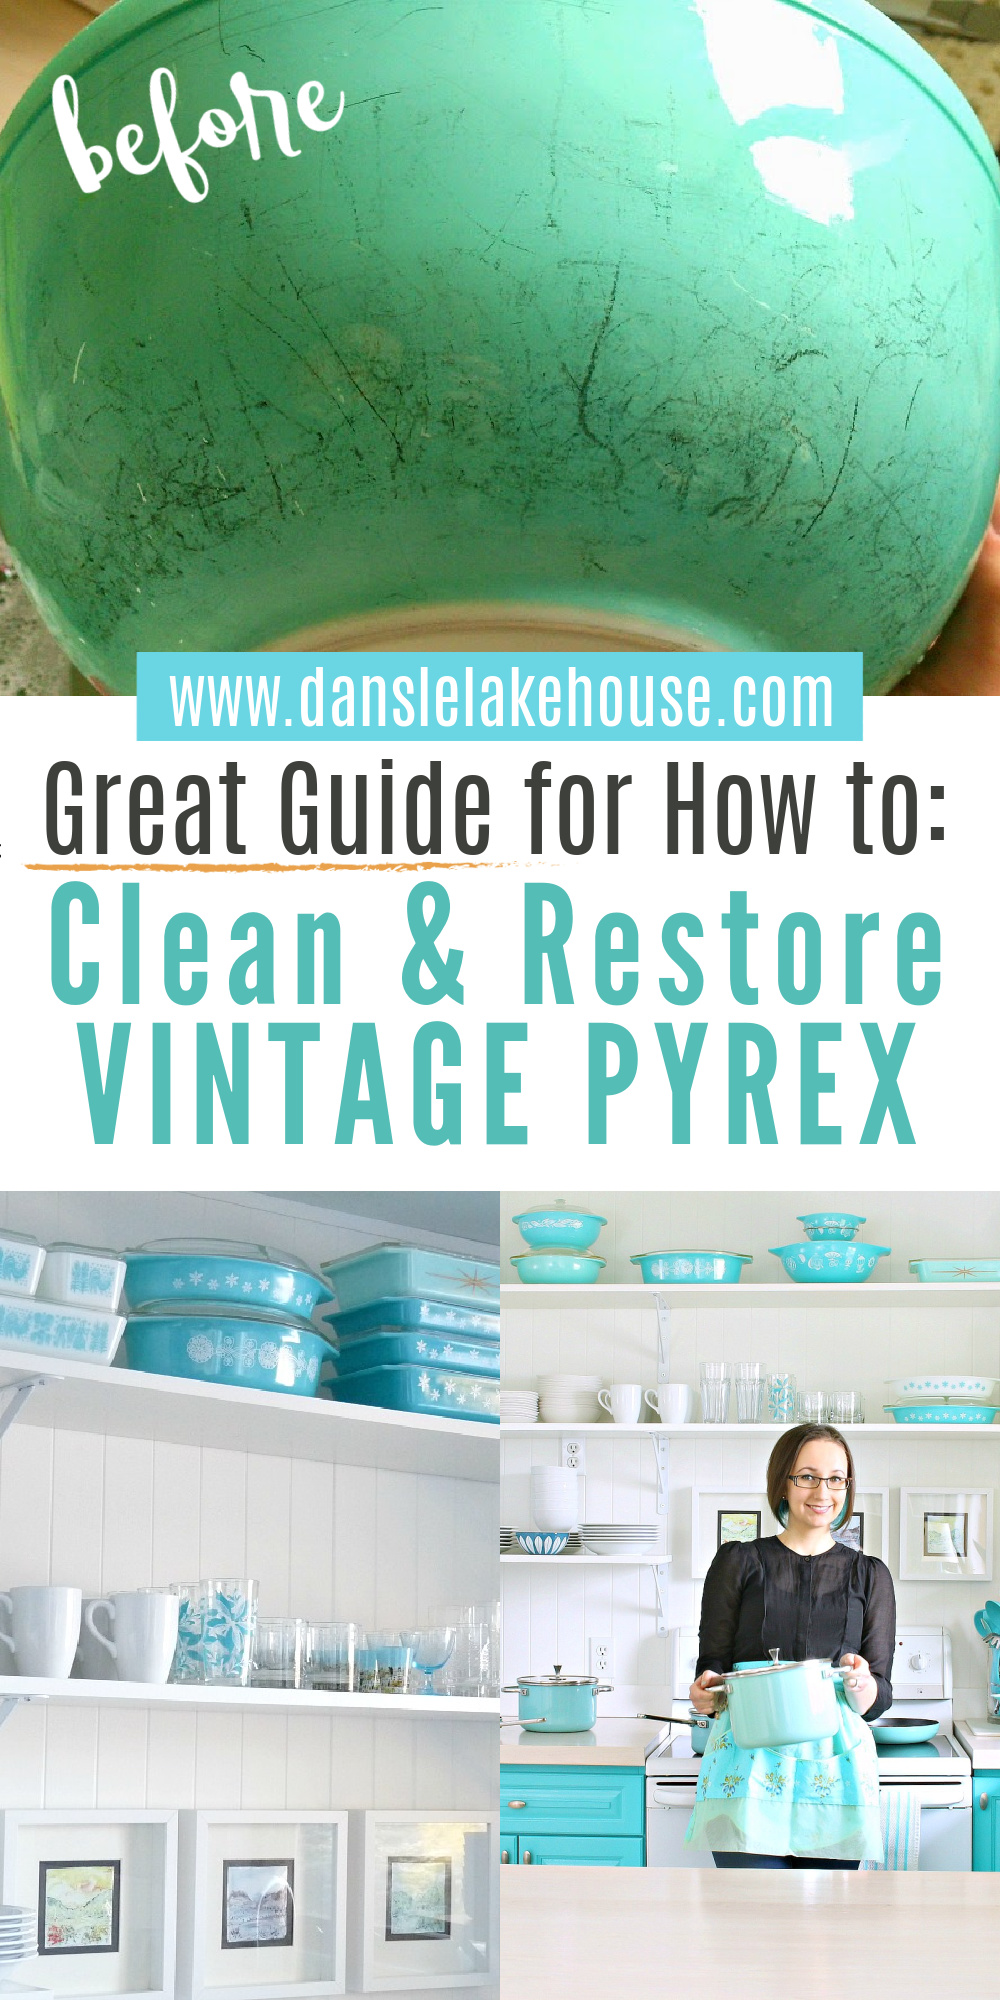 GREAT GUIDE: How to Clean and Restore Vintage Pyrex